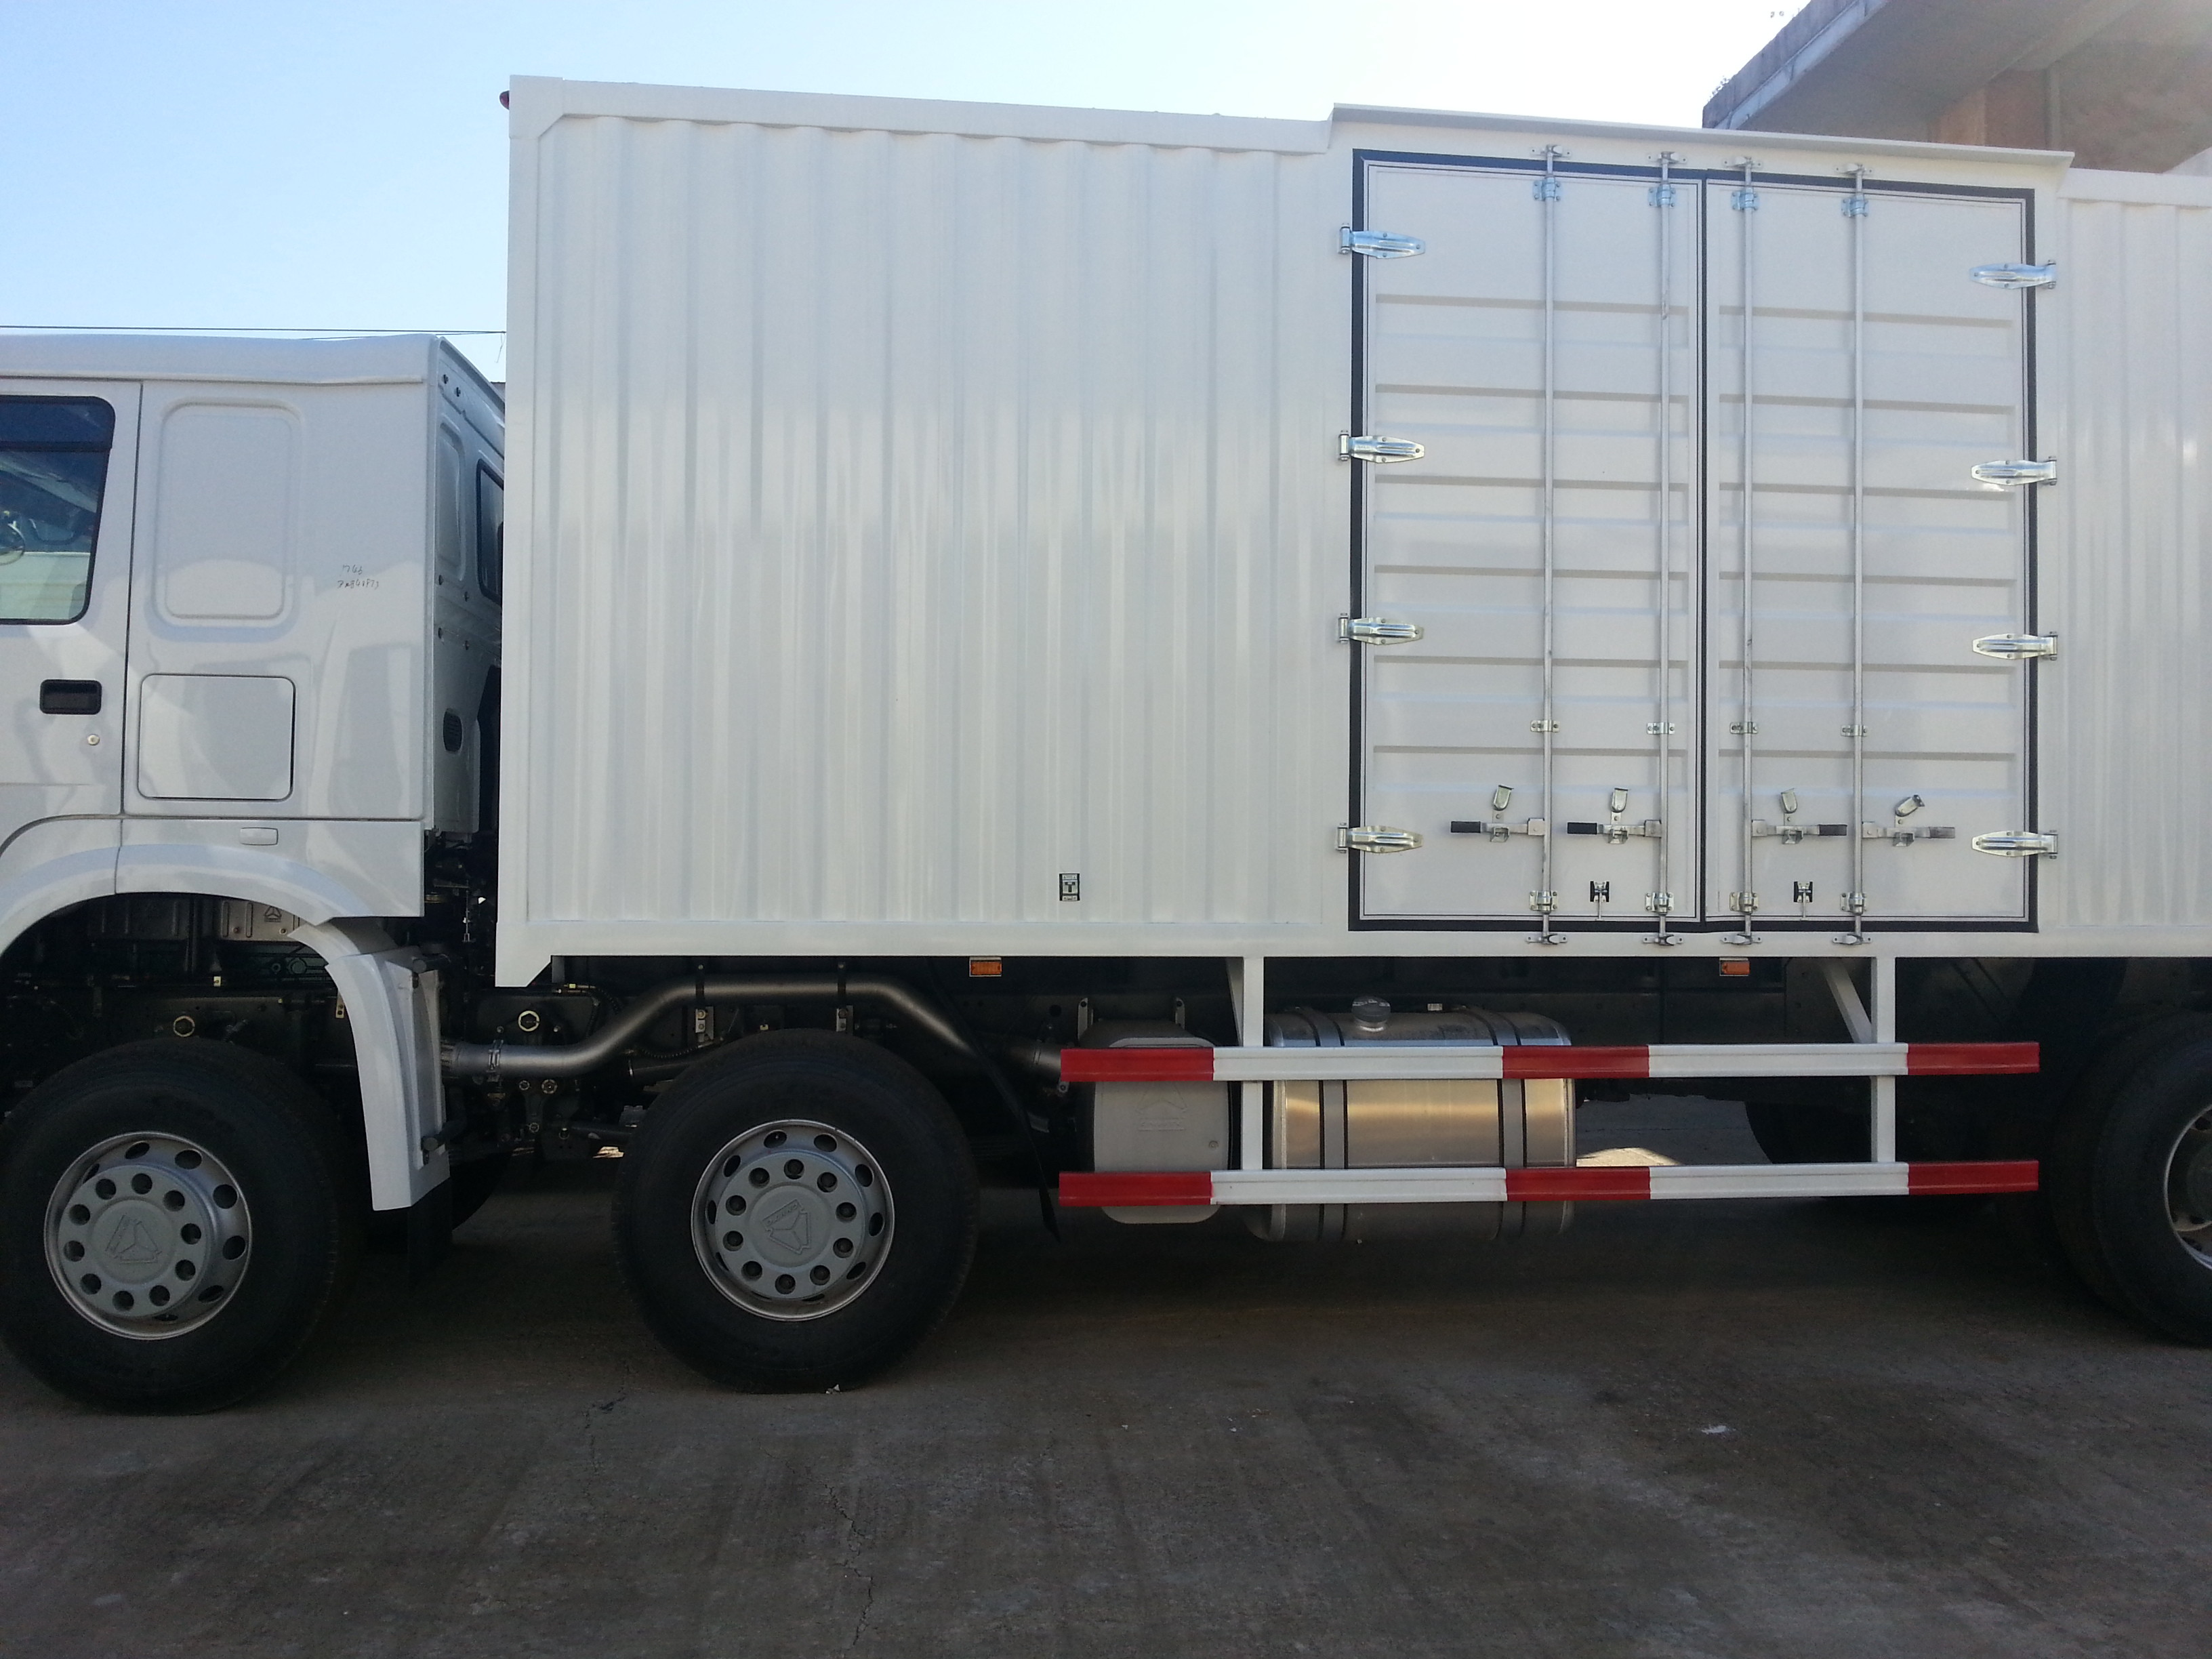 White 41-50 Ton Capacity Heavy Cargo Truck Diesel Fuel Type Optional Driving